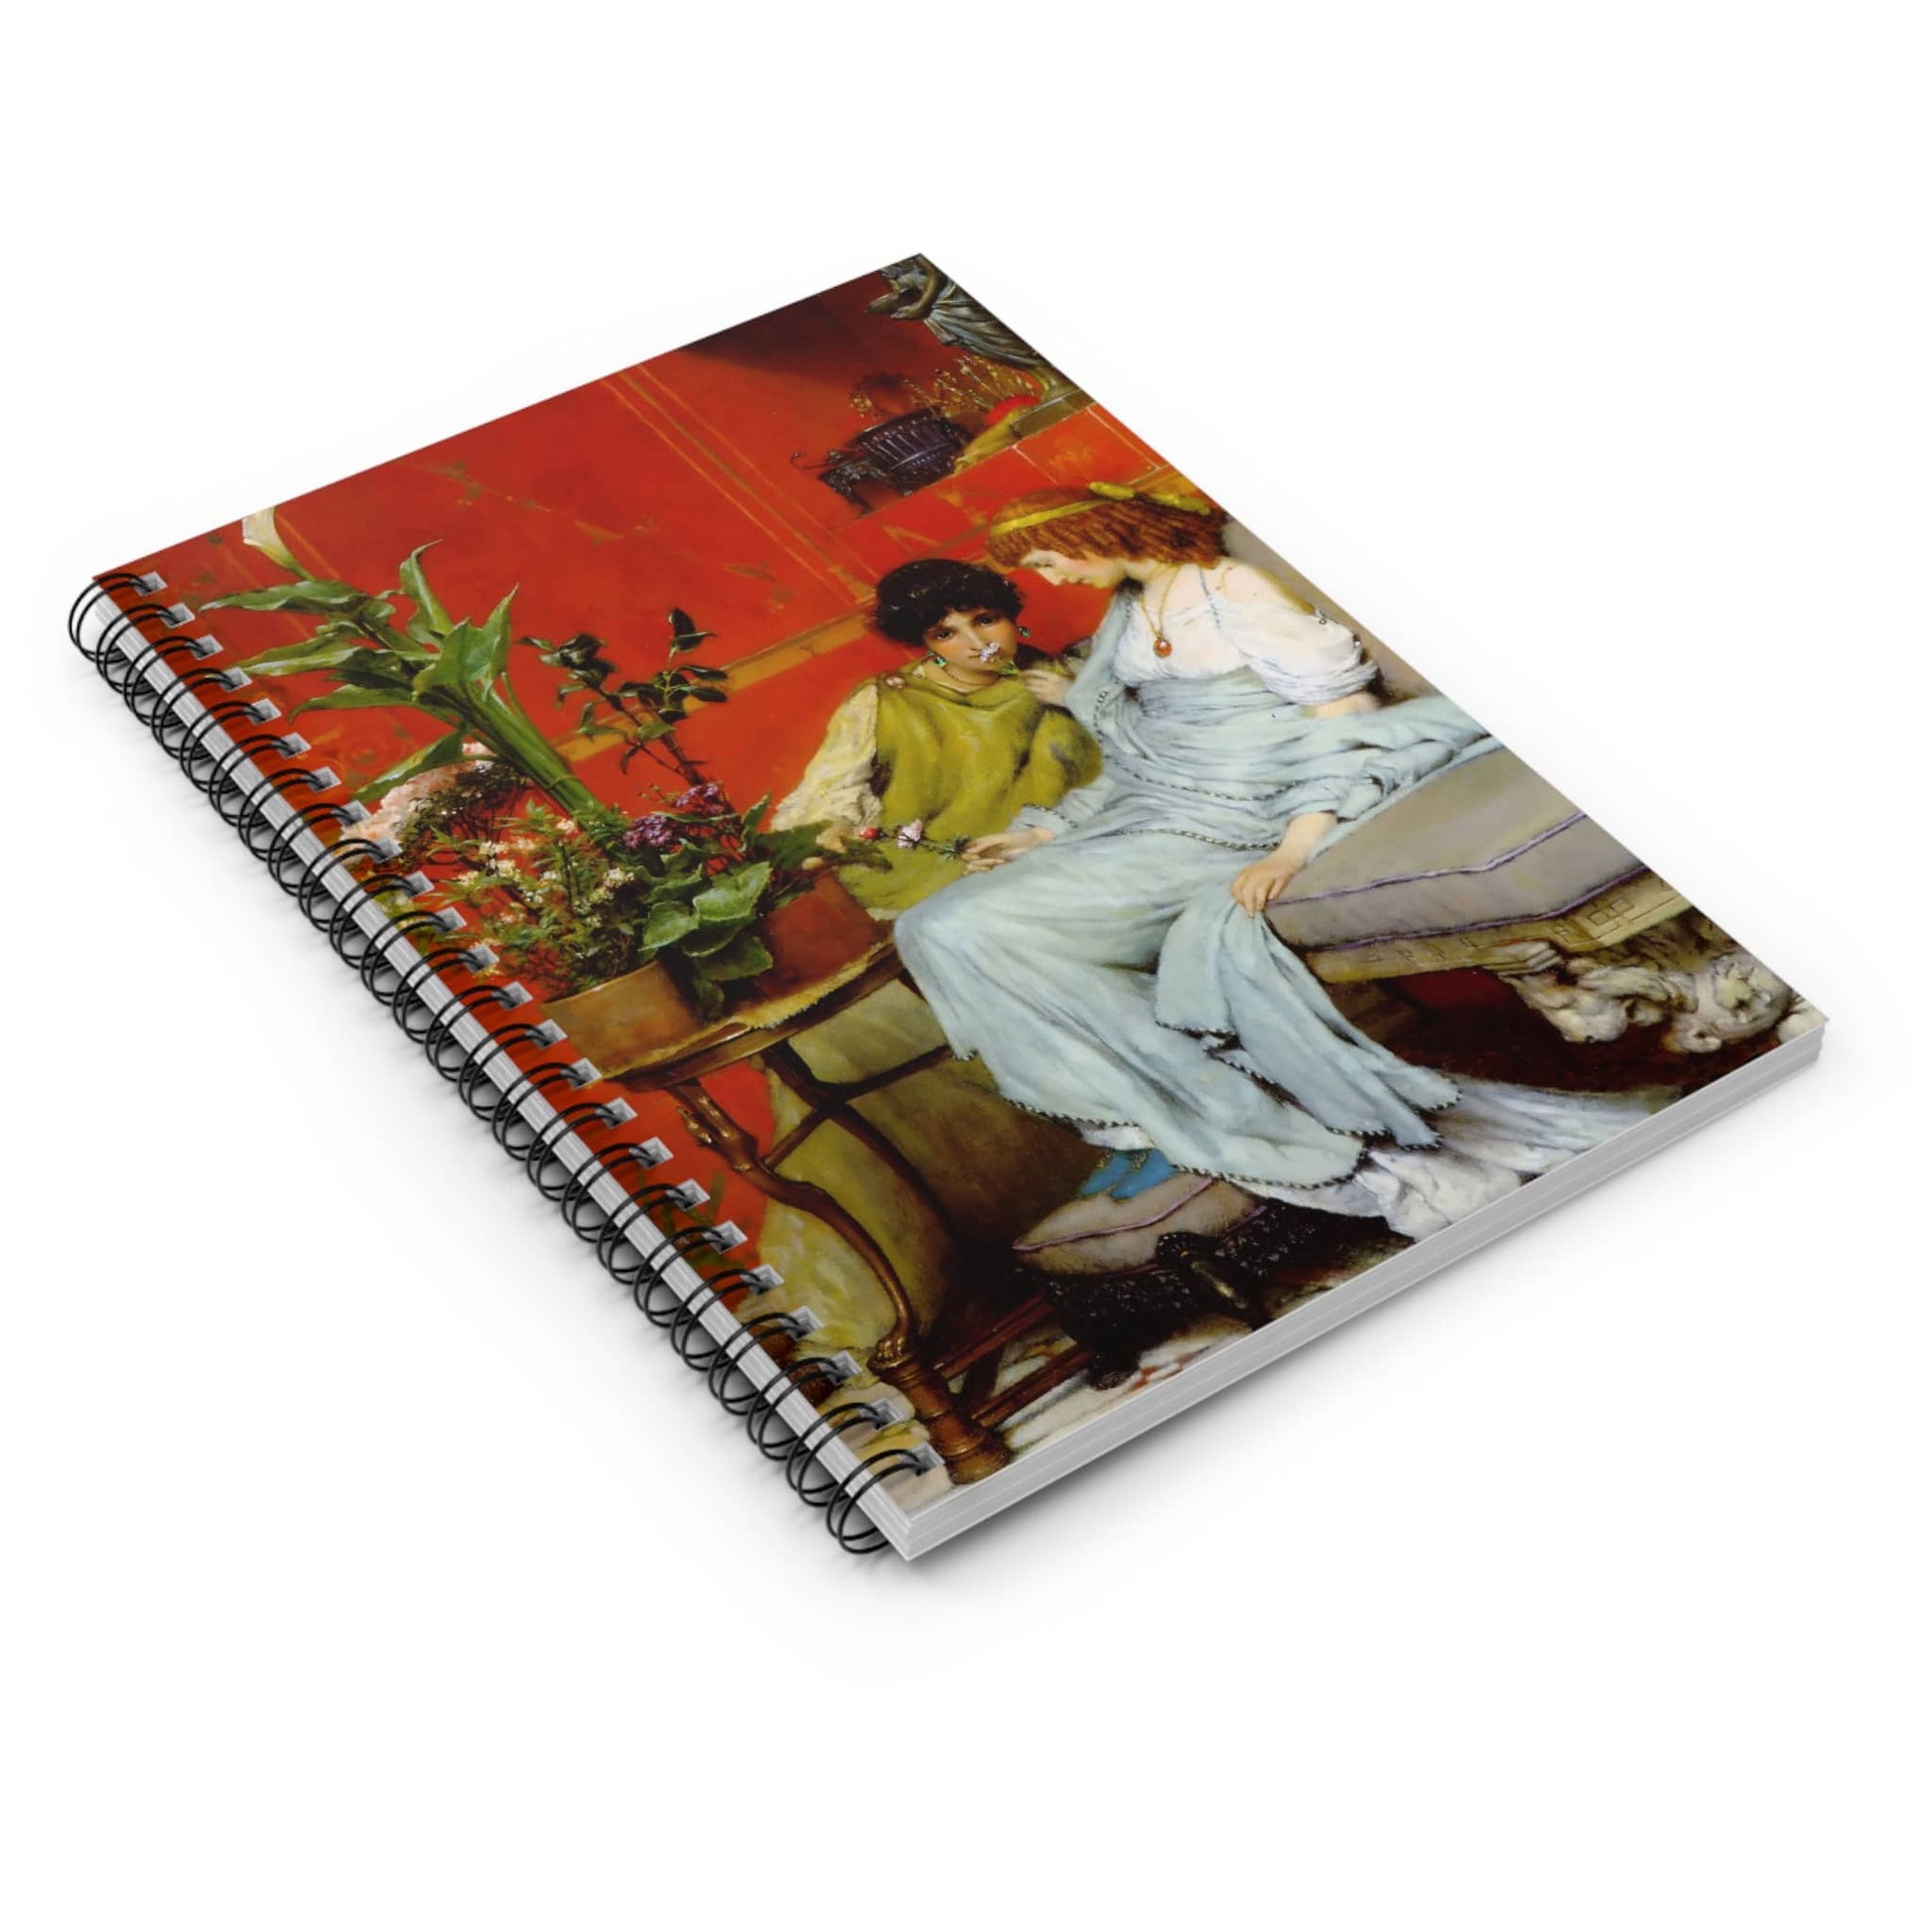 Secret Lives Spiral Notebook Laying Flat on White Surface